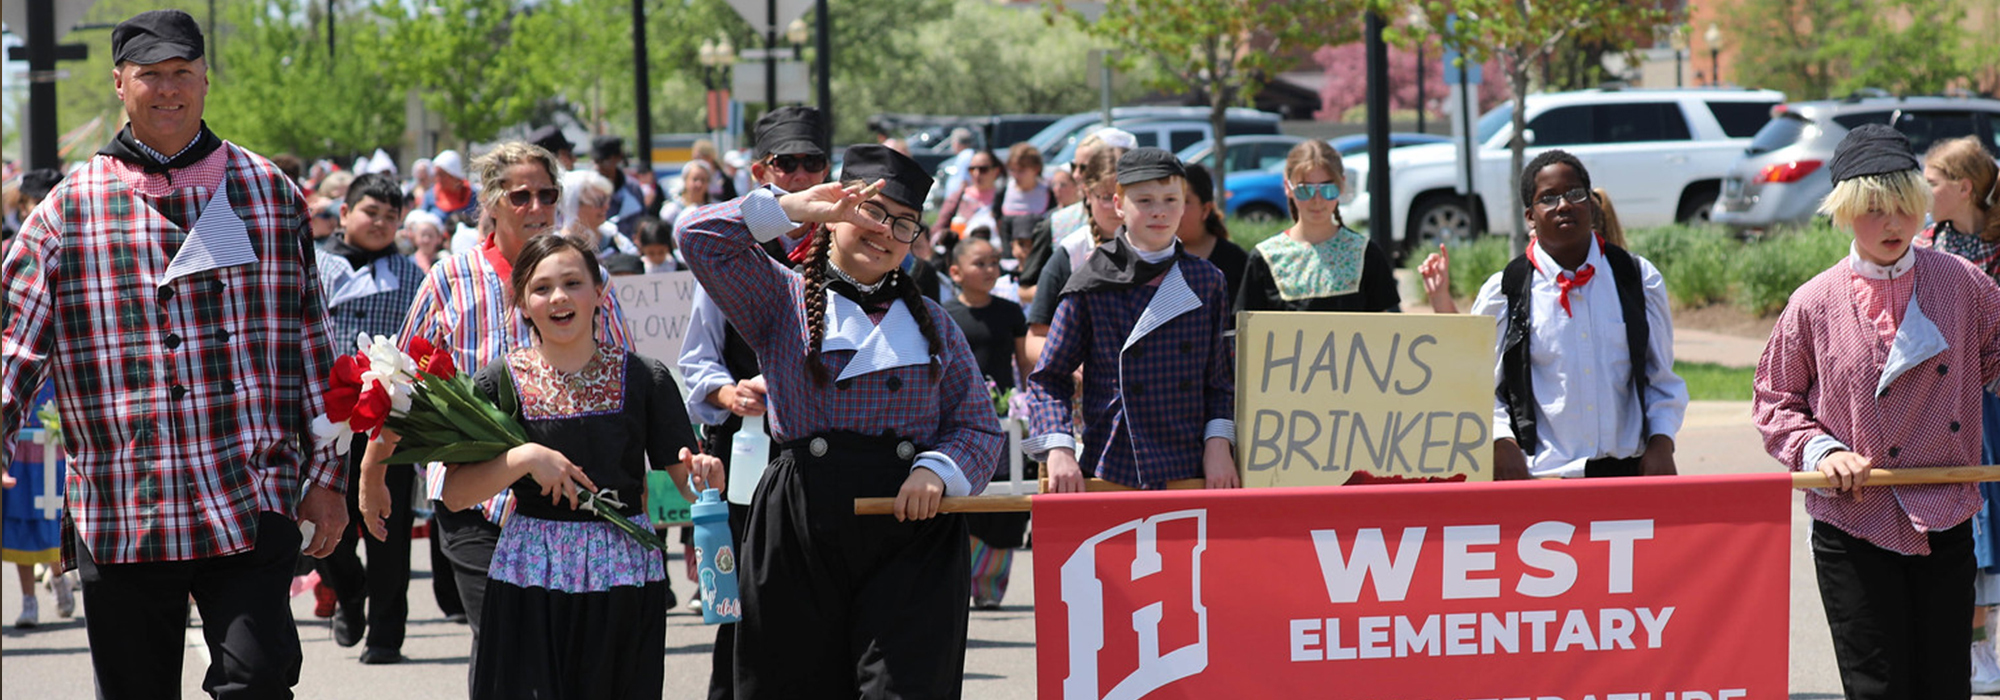 West students march in the Tulip Time Kinderprade